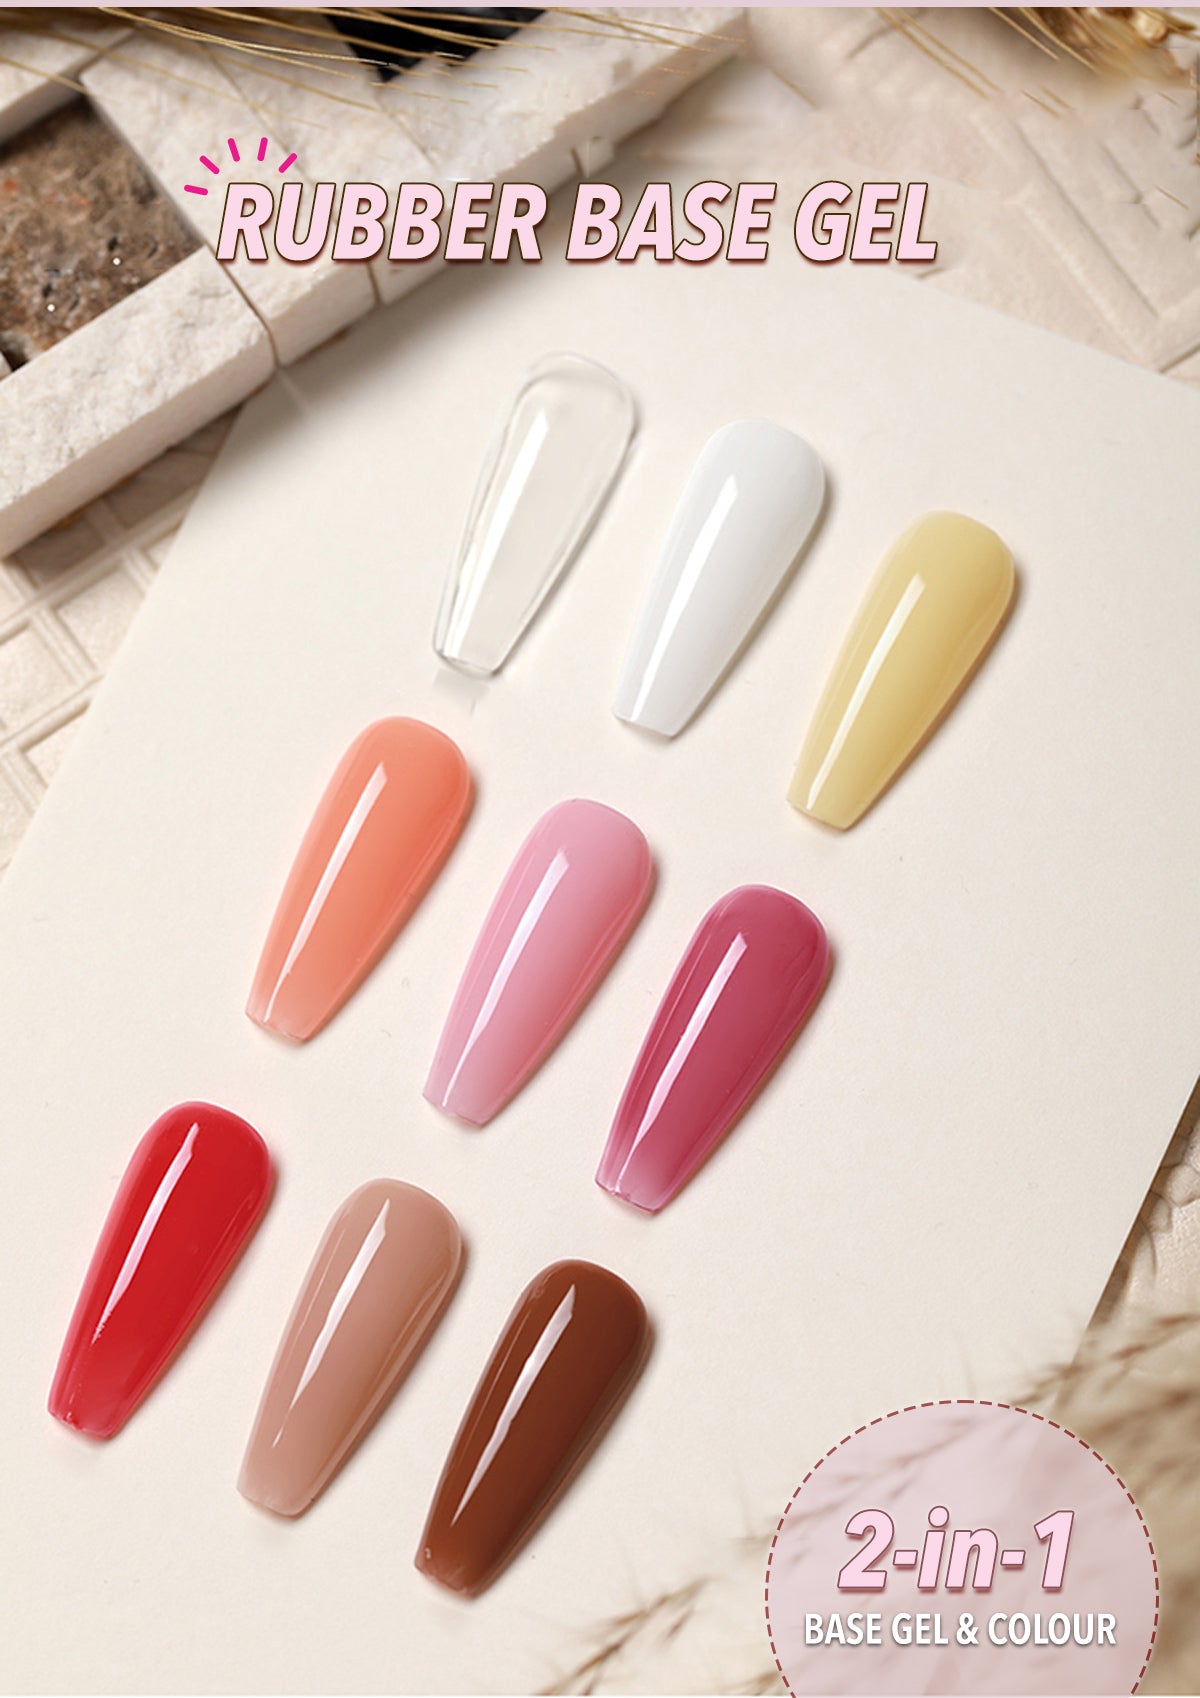 2-in-1 Gel Colour Rubber Base Coat Swatches